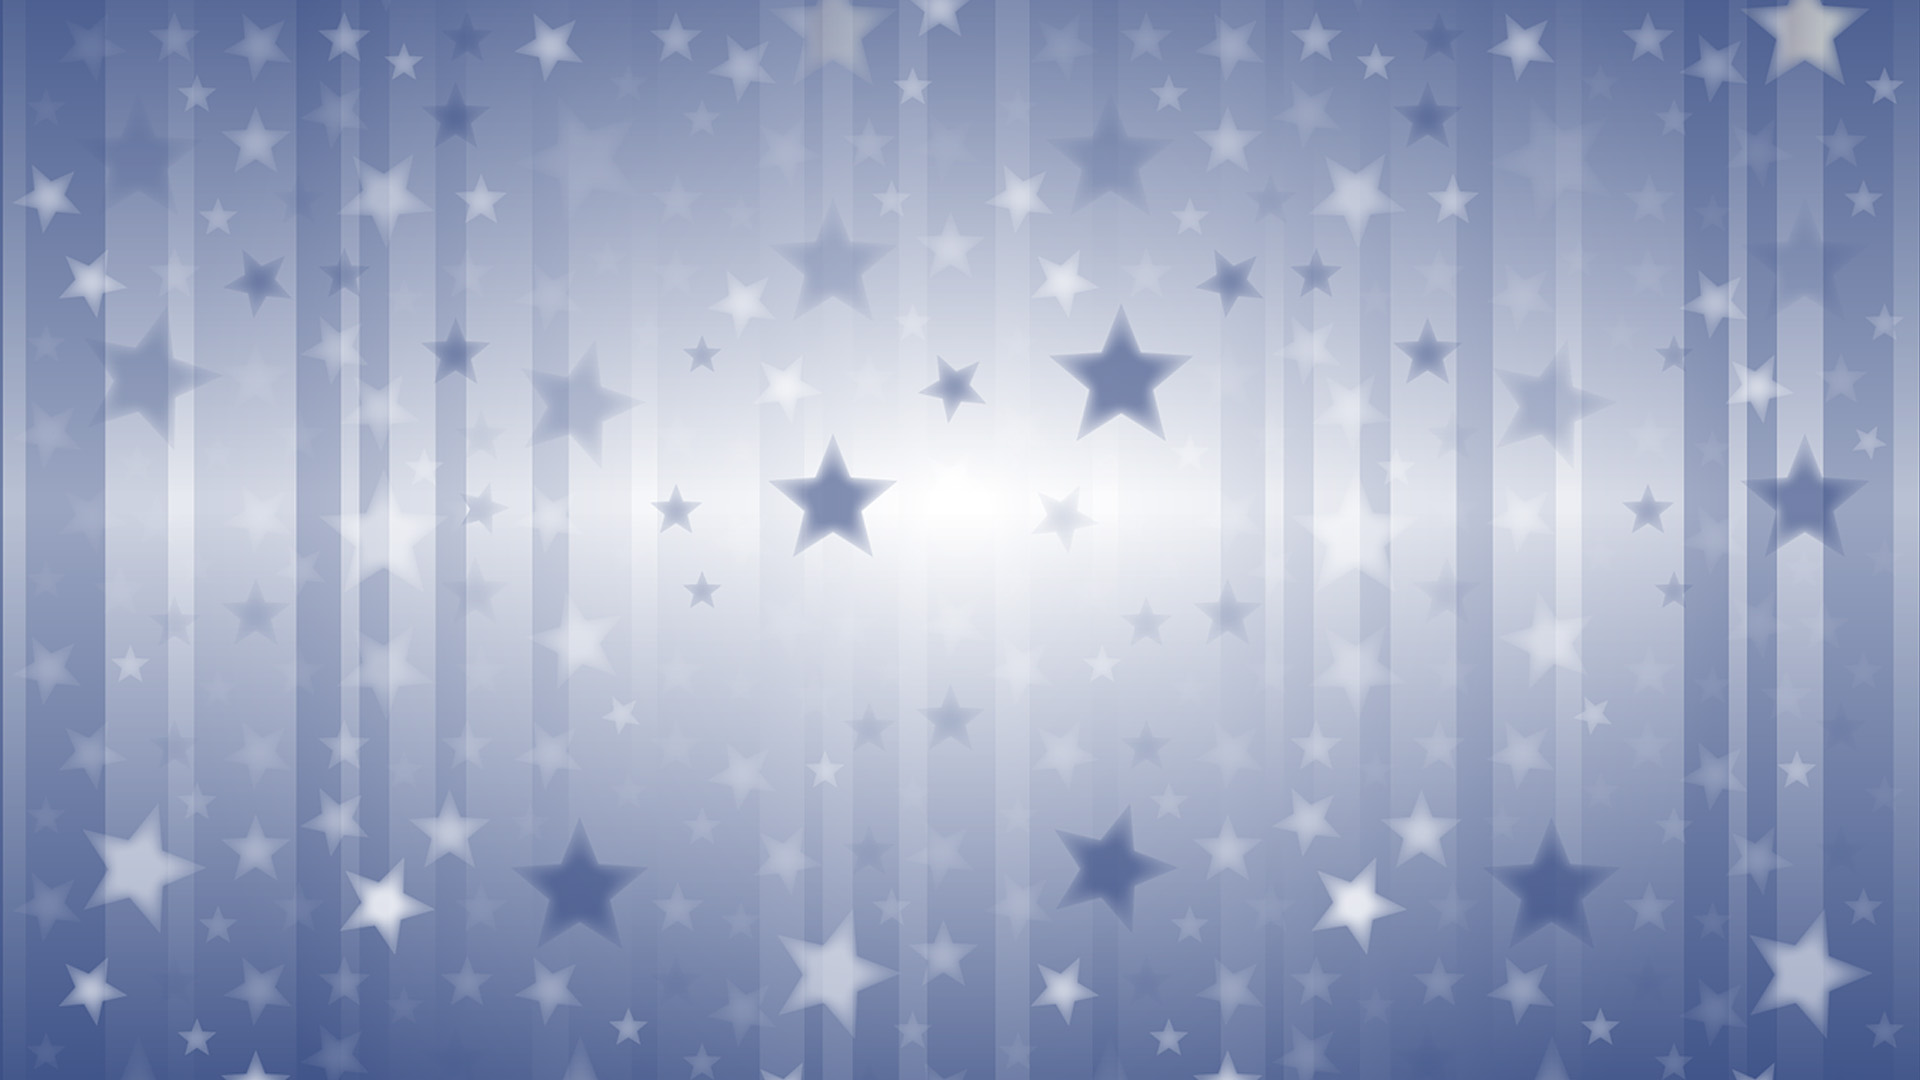 Light blue radial gradient background with white and blue stars dispersed throughout the image.